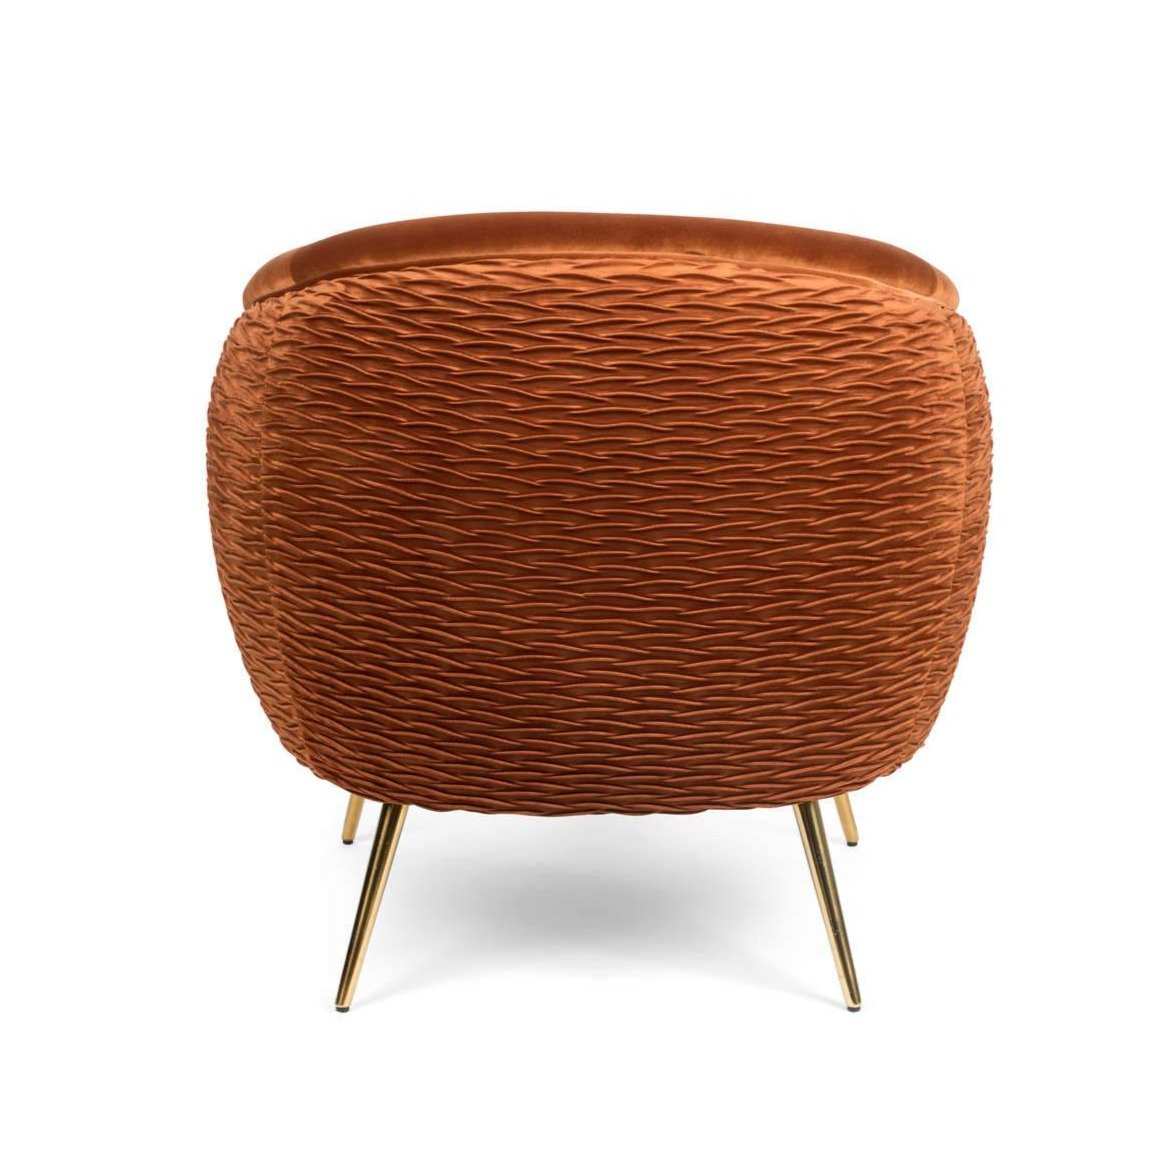 A seating armchair with a personality that attracts attention. Rich, velvety upholstery, impeccable rounding and textured backrest are his hallmarks. So Curvy should not sit quietly in the corner.